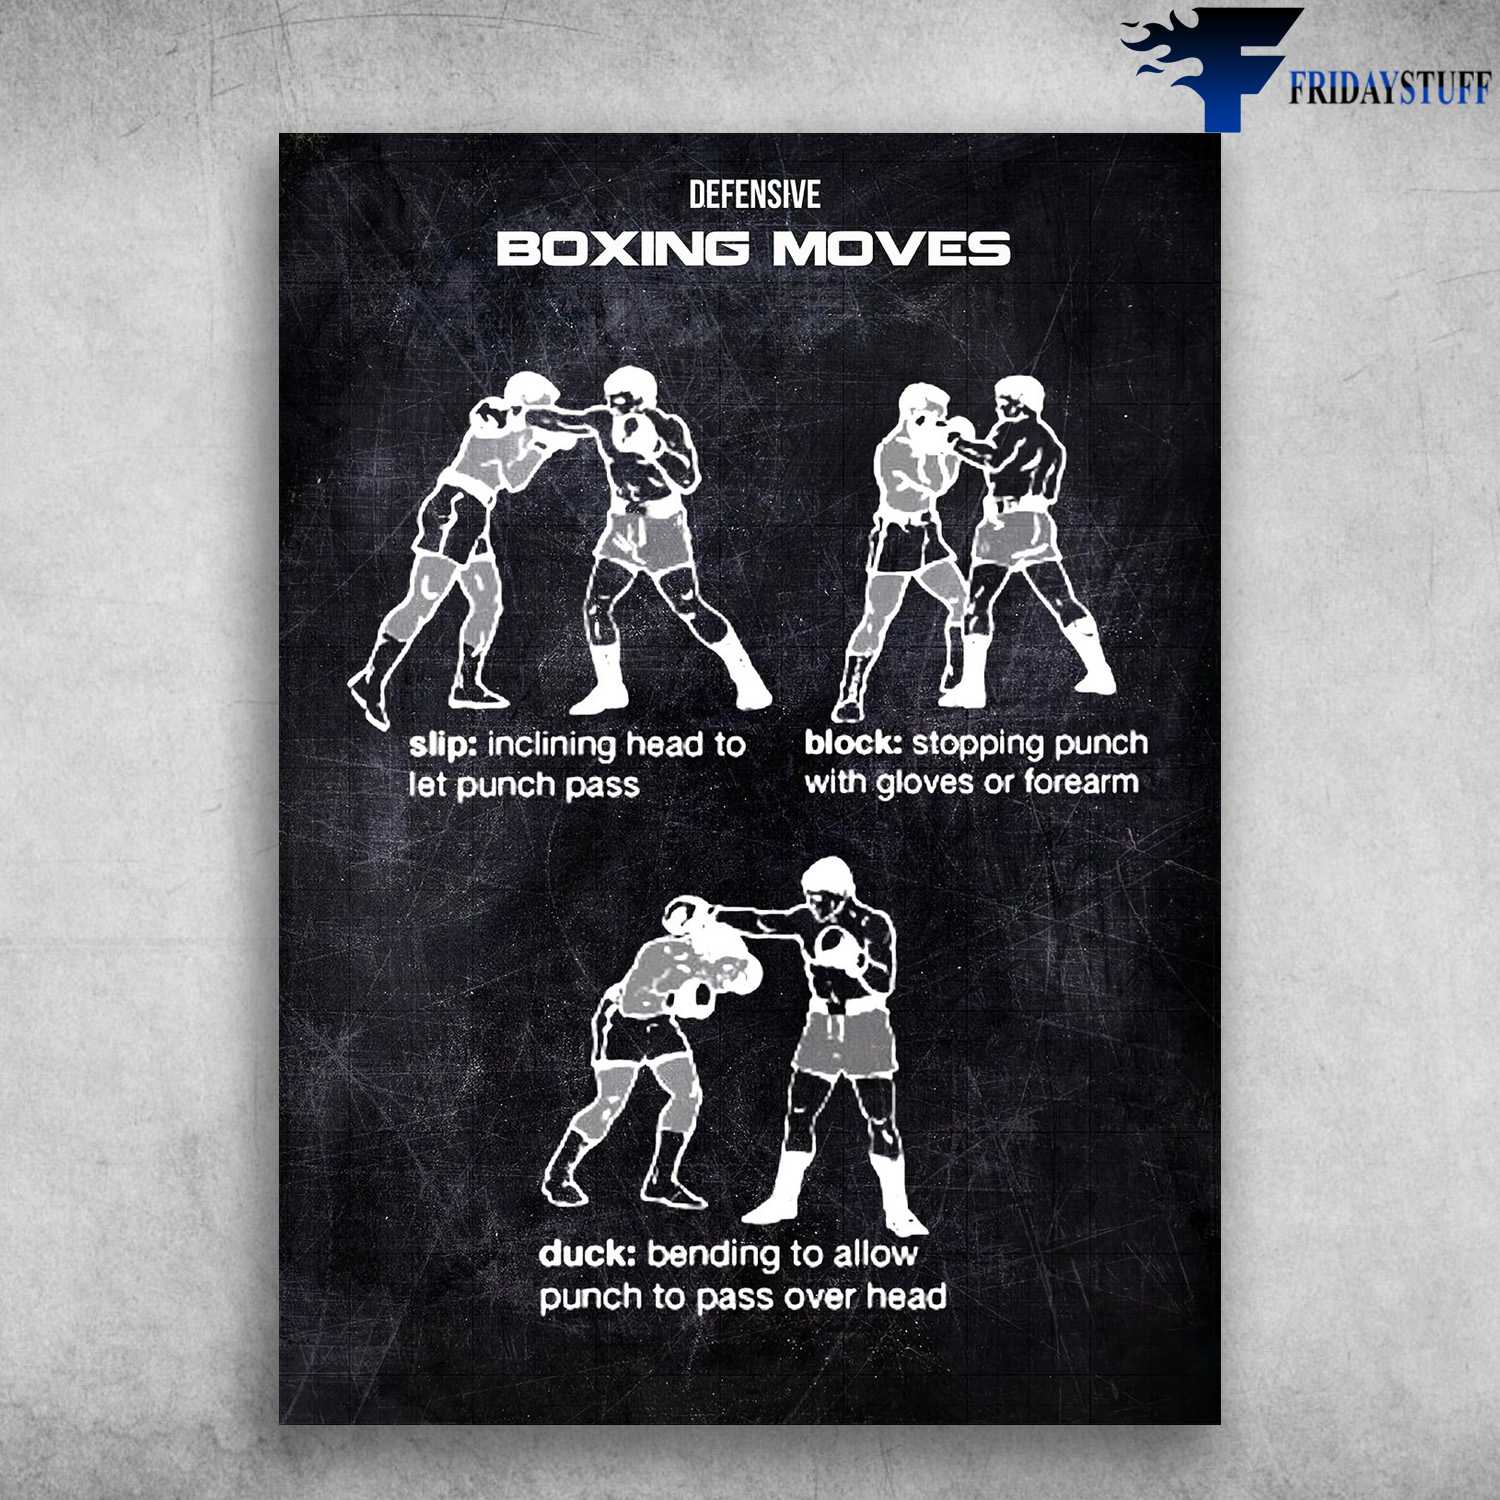 Boxing Poster - Defensive Boxing Moves, Slip Inclining Head To Let Punch Pass, Block Stopping Punch With Gloves Or Forearm, Duck Bending To Allow Punch To Pass Over Head